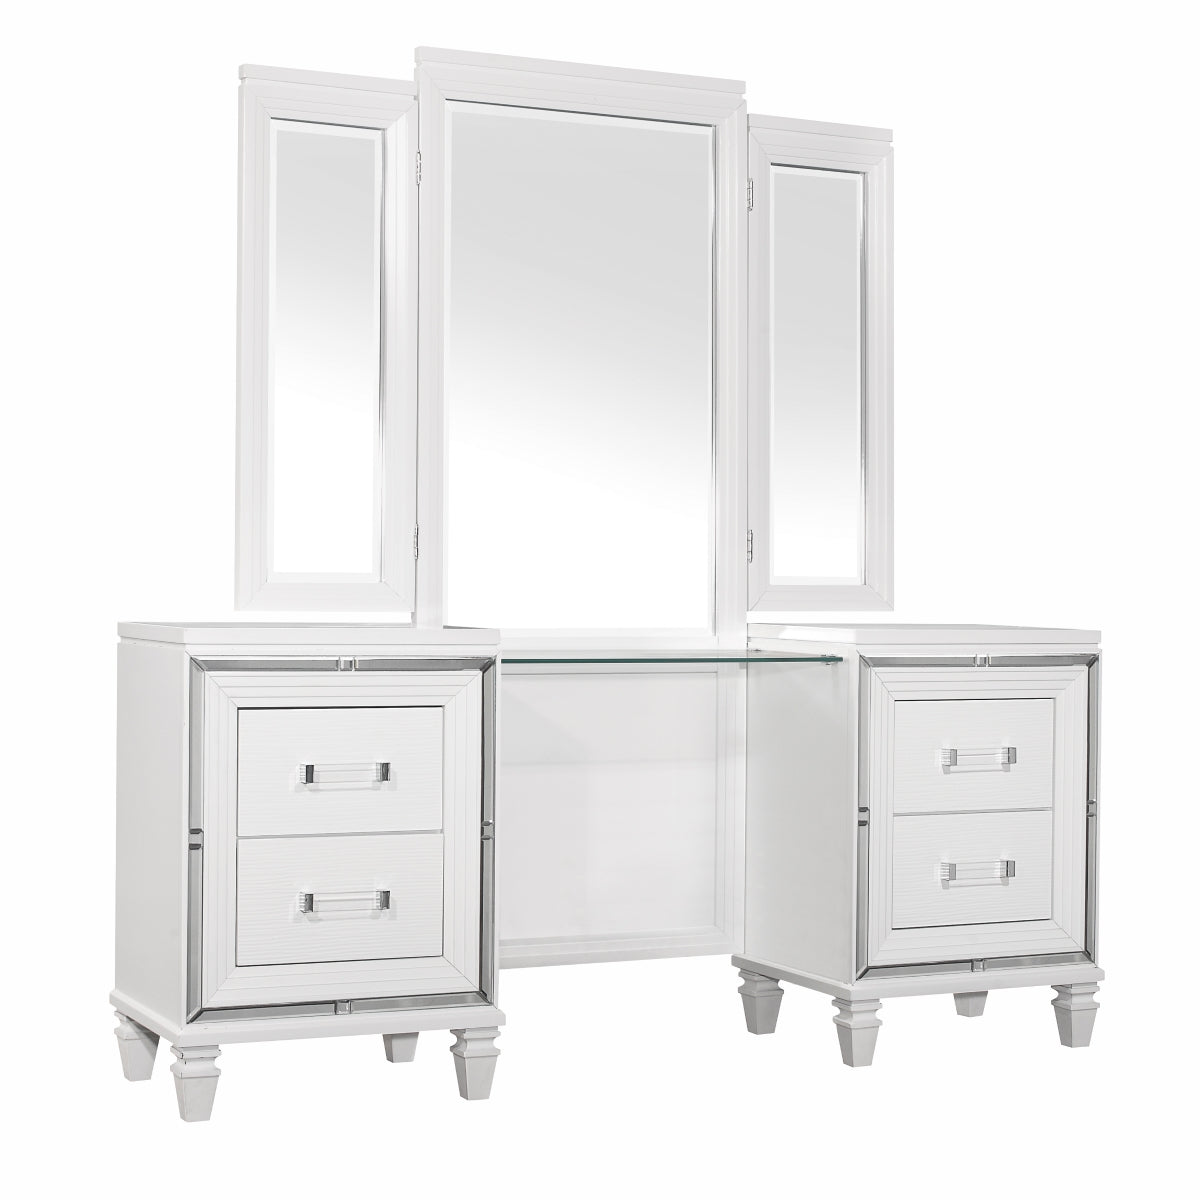 Tamsin White Metallic Contemporary Wood And Engineered Wood Vanity Dresser With Mirror